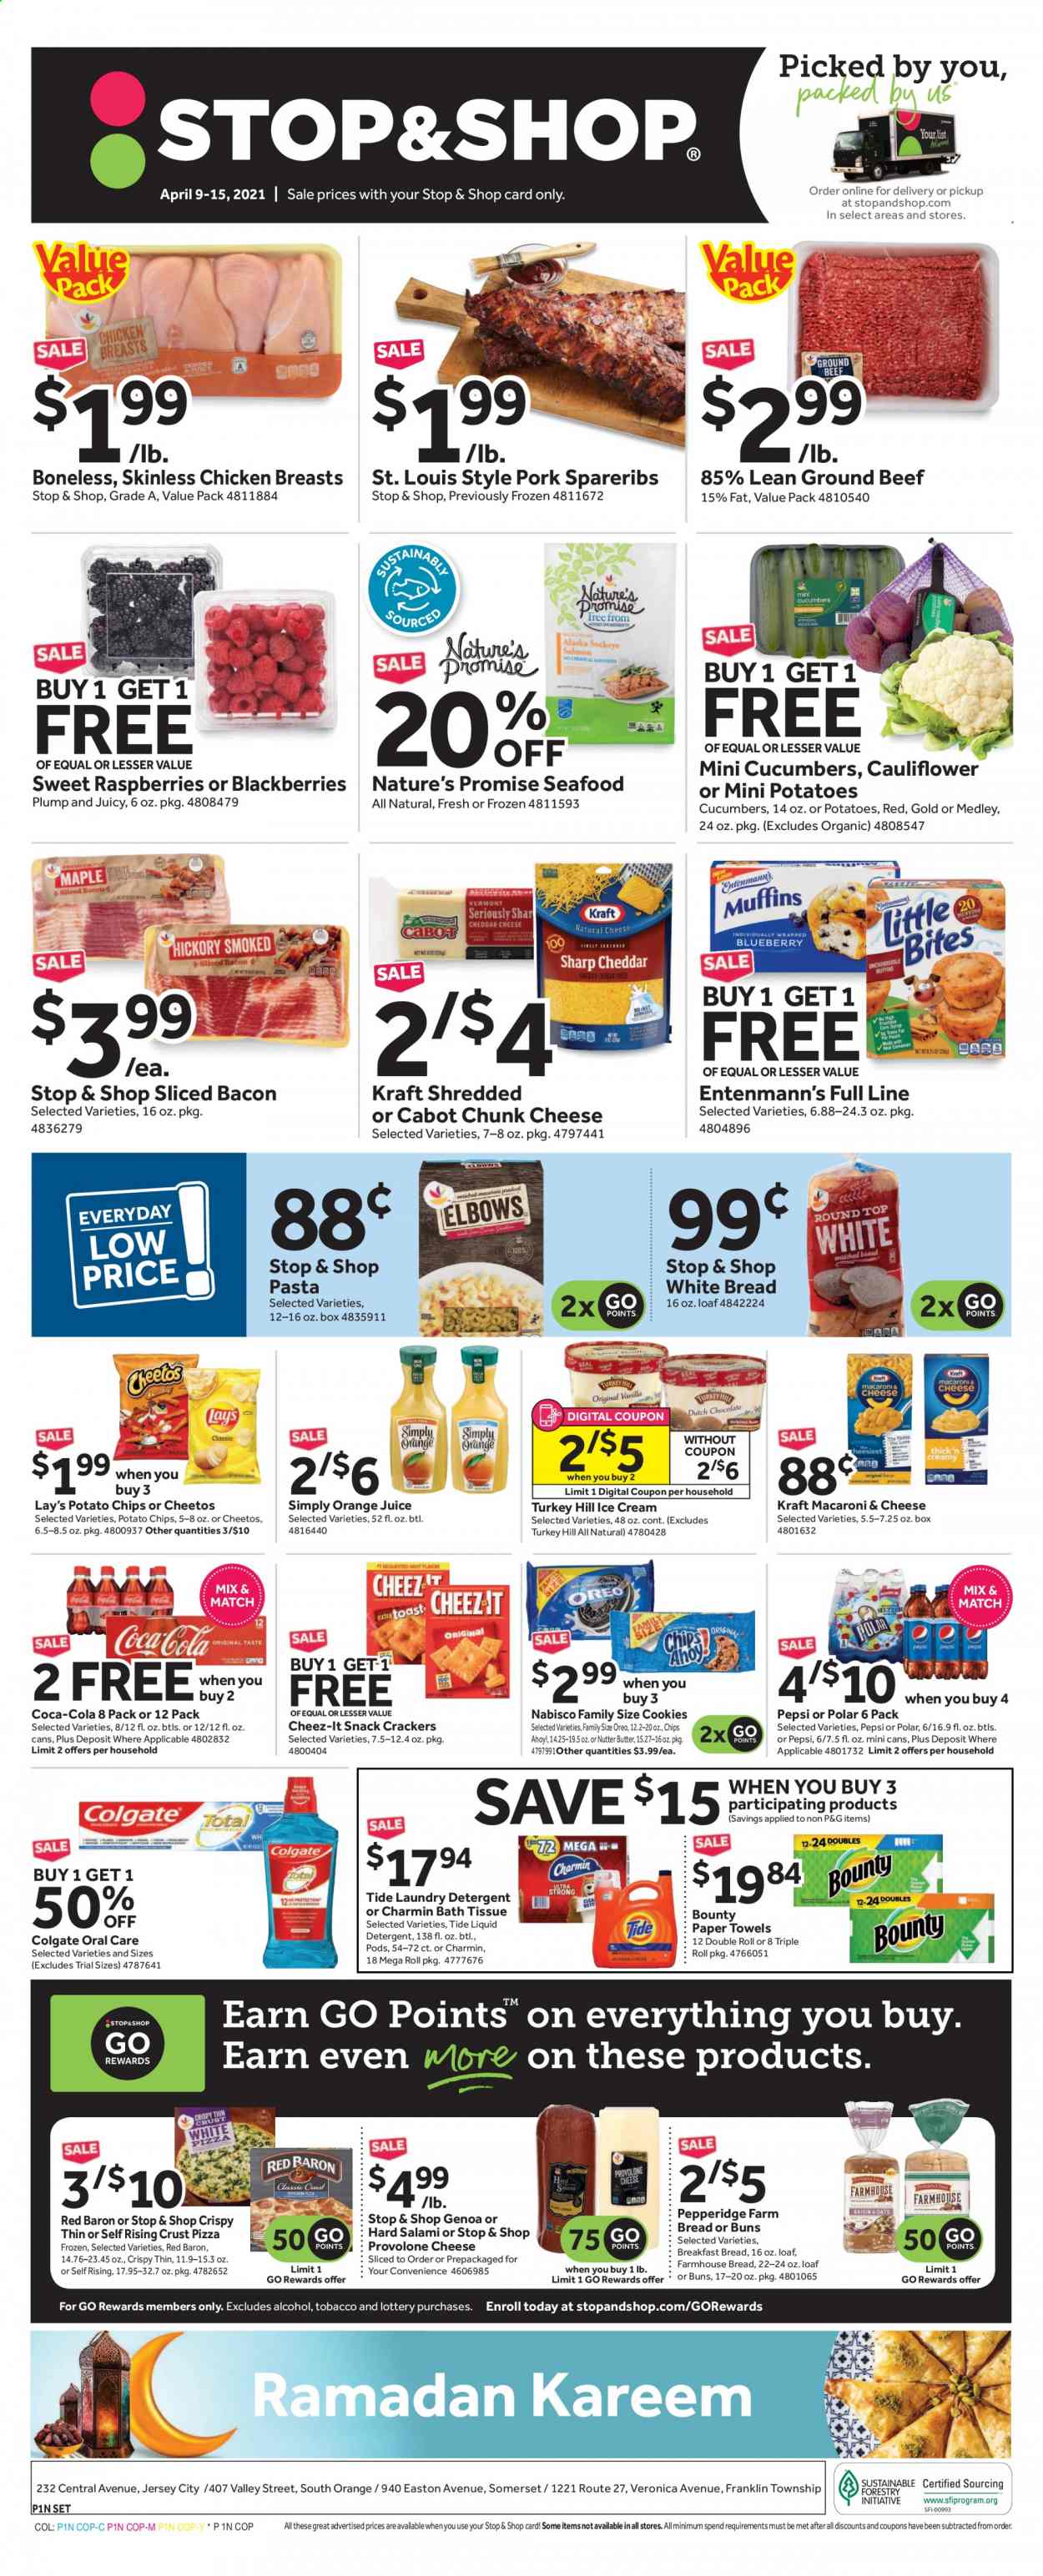 thumbnail - Stop & Shop Flyer - 04/09/2021 - 04/15/2021 - Sales products - white bread, buns, Nature’s Promise, muffin, Entenmann's, cauliflower, blackberries, raspberries, chicken breasts, beef meat, ground beef, pork spare ribs, seafood, macaroni & cheese, pizza, Kraft®, bacon, salami, chunk cheese, Provolone, Oreo, butter, ice cream, Red Baron, cookies, snack, Bounty, crackers, Little Bites, potato chips, Cheetos, Lay’s, Cheez-It, pasta, Coca-Cola, Pepsi, orange juice, juice, bath tissue, kitchen towels, paper towels, Charmin, Tide, laundry detergent, liquid detergent, Colgate, Sharp, pin. Page 1.